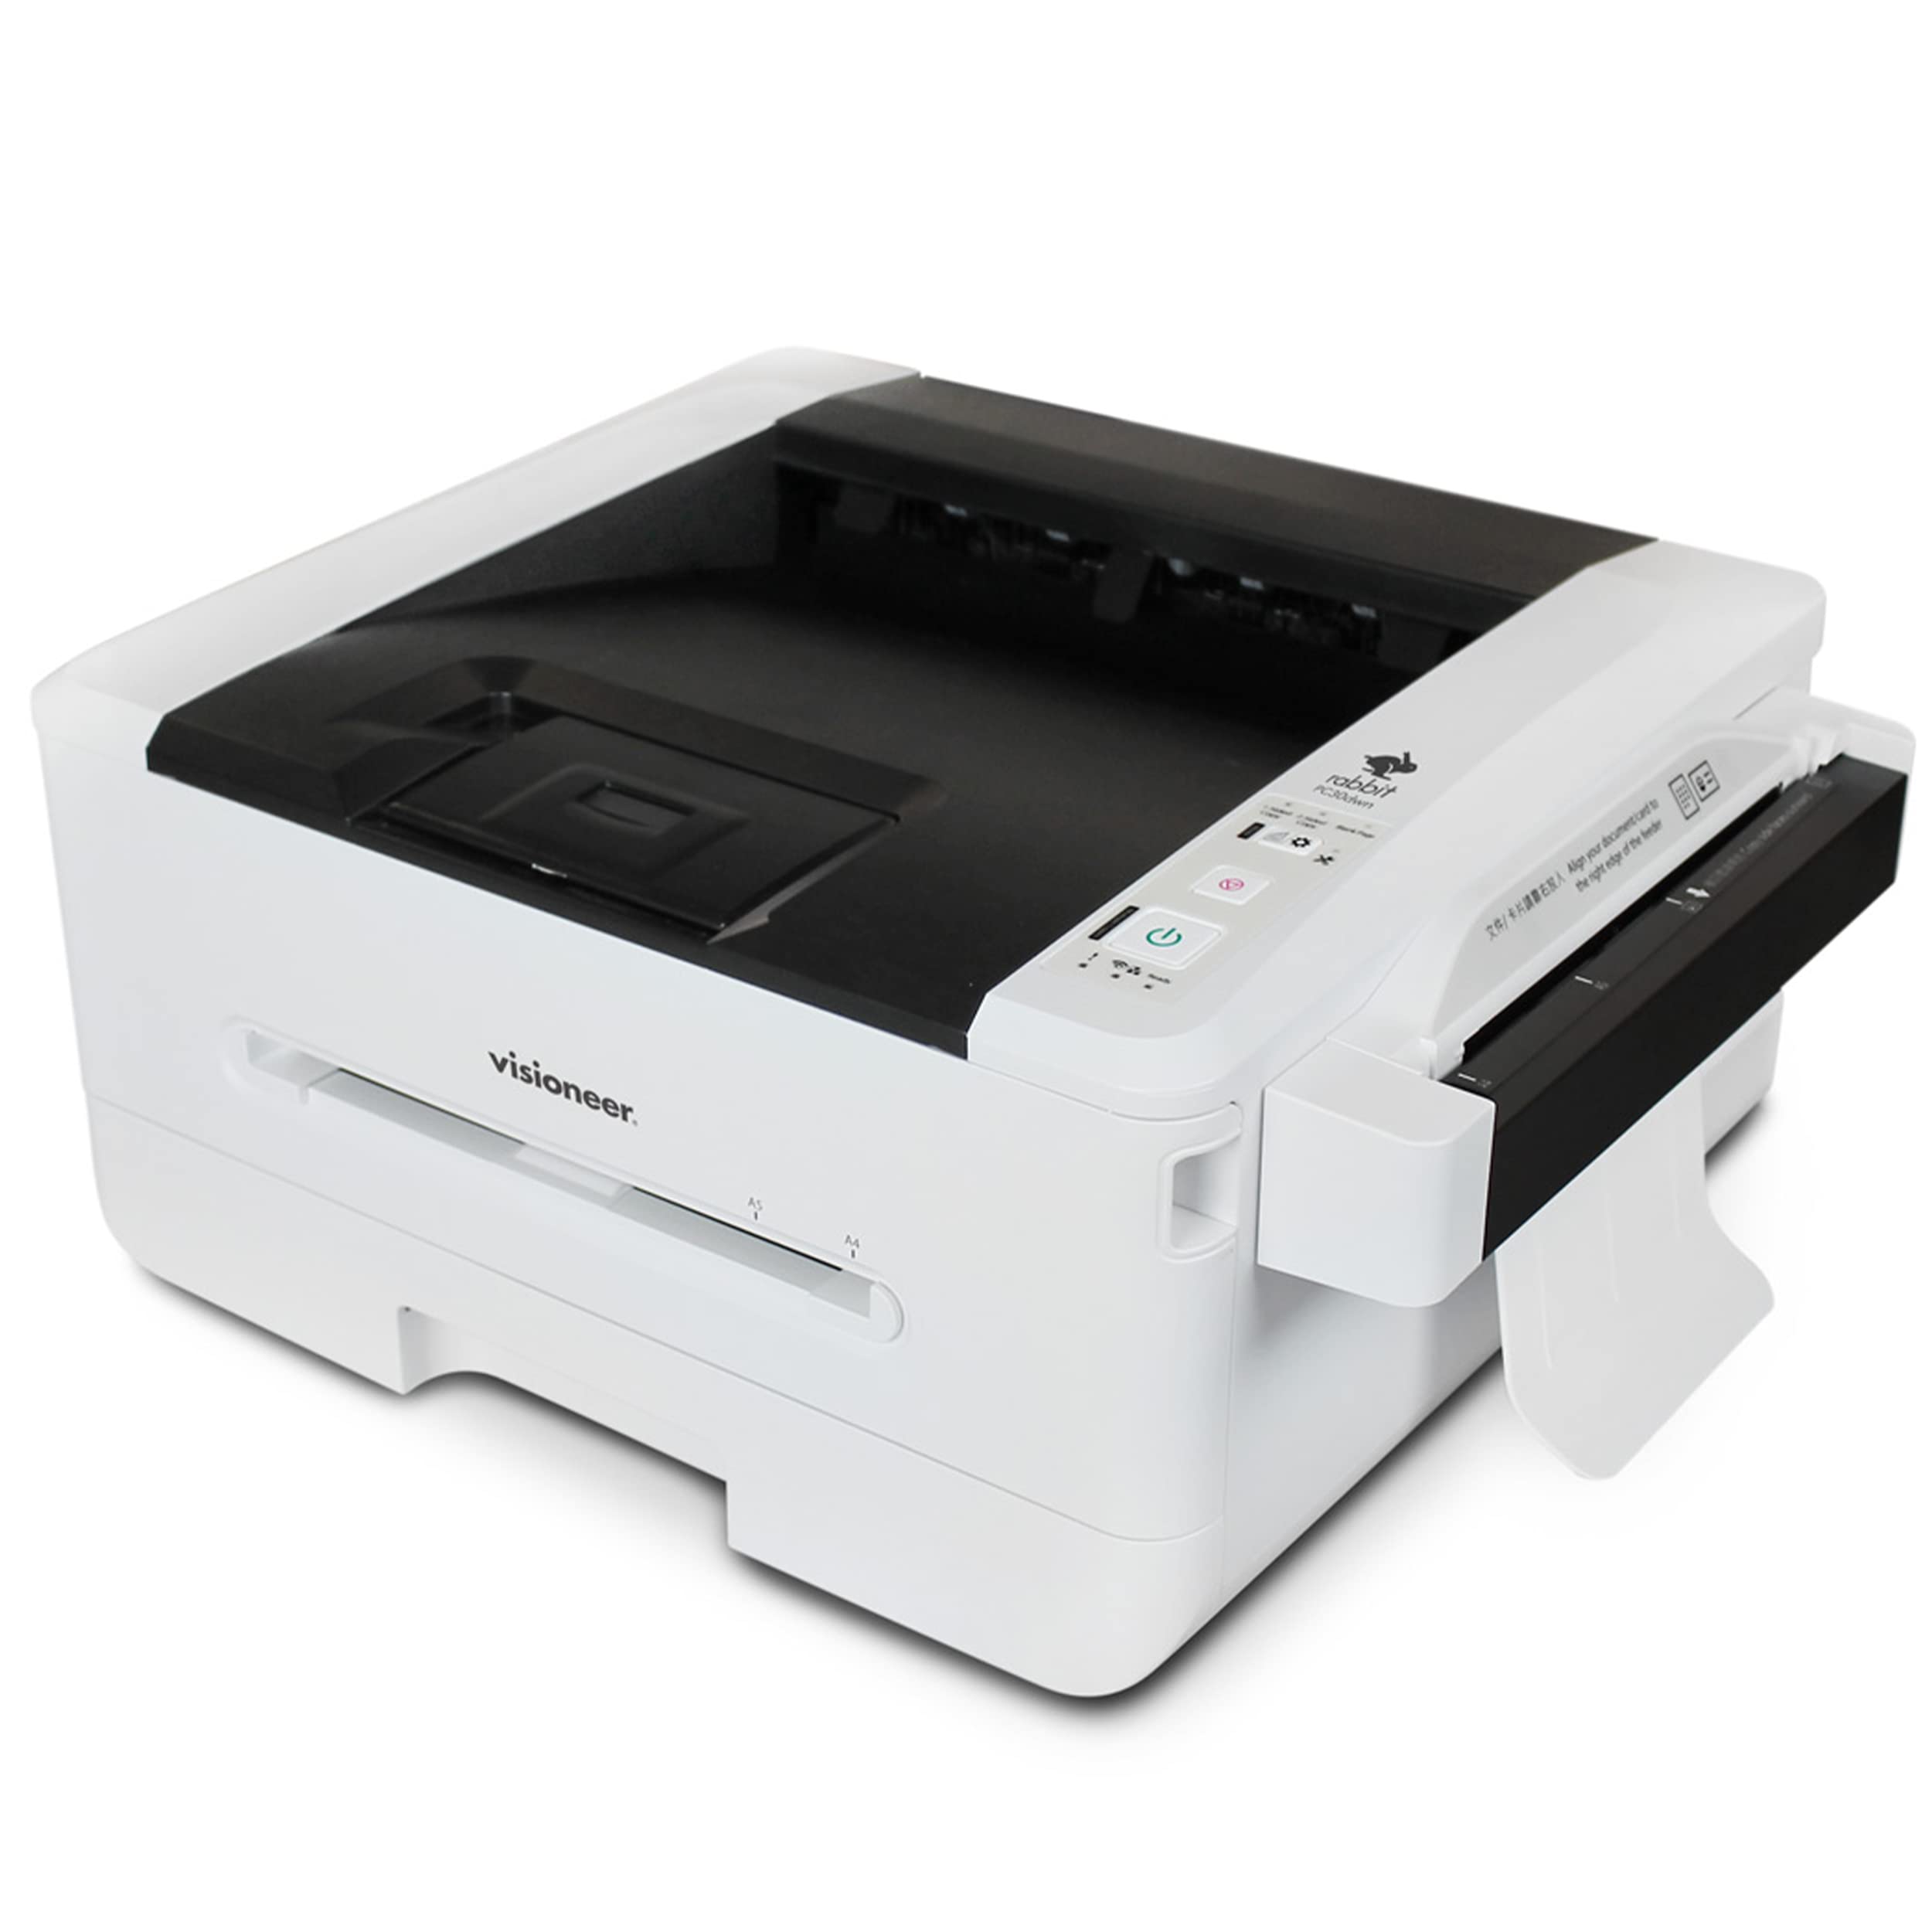 Visioneer Rabbit PC30dwn Laser Printer/Copy Machine, Monochrome USB Office Printer and Copier for PC and Mac, 30 PPM, 250 Page Automatic Document Feeder (ADF)